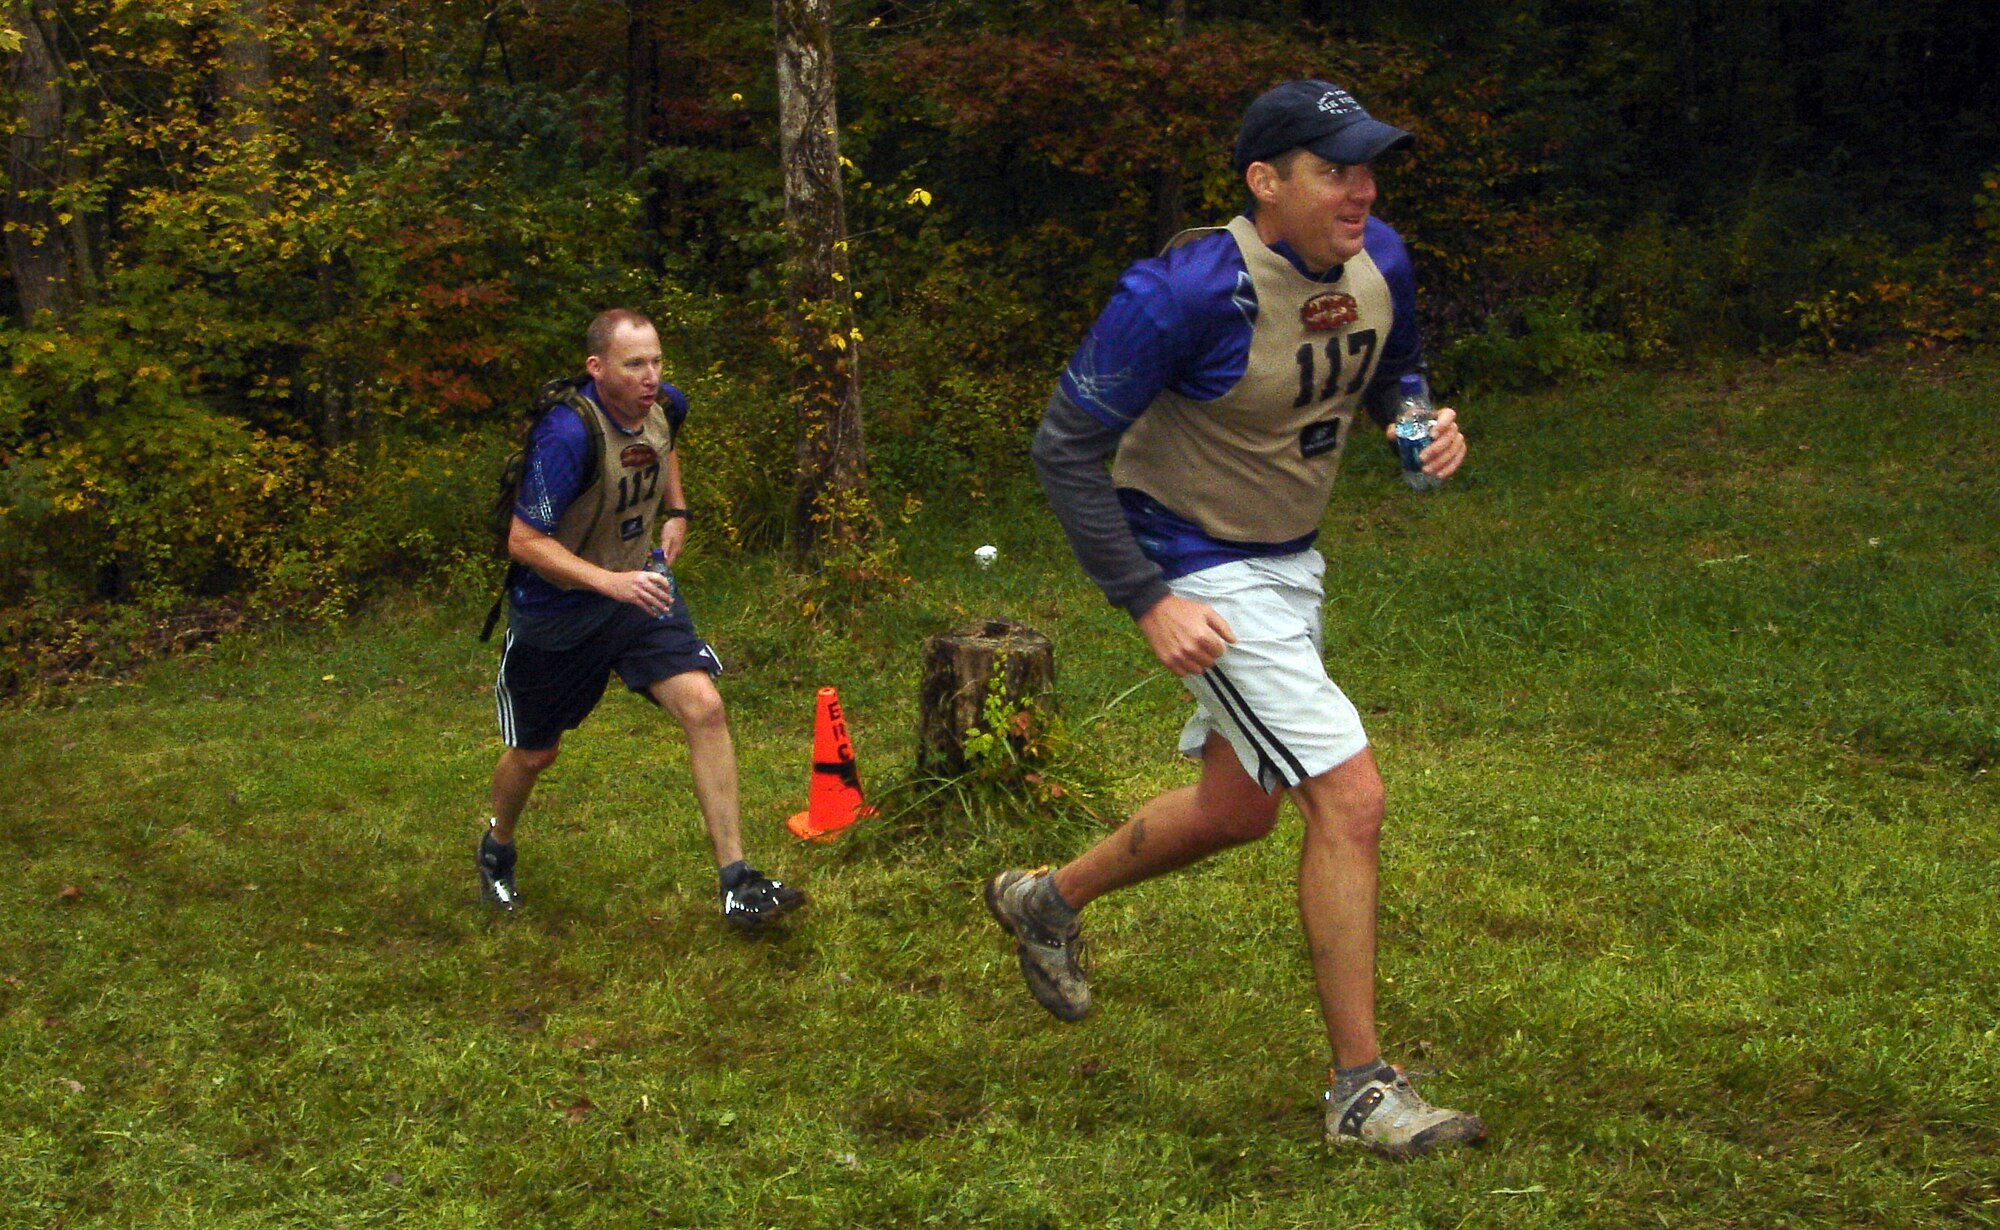 Mike Sonderman and Gene Vesey, members of the Defense Finance Accounting Service and 460th Comptroller Squadron Wilderness Challenge team, DFASt, run the last 200 yards of the 53-mile, six-event military adventure race Oct. 7. DFASt came in first out of five Air Force teams and 16th out of all 51 teams.                 